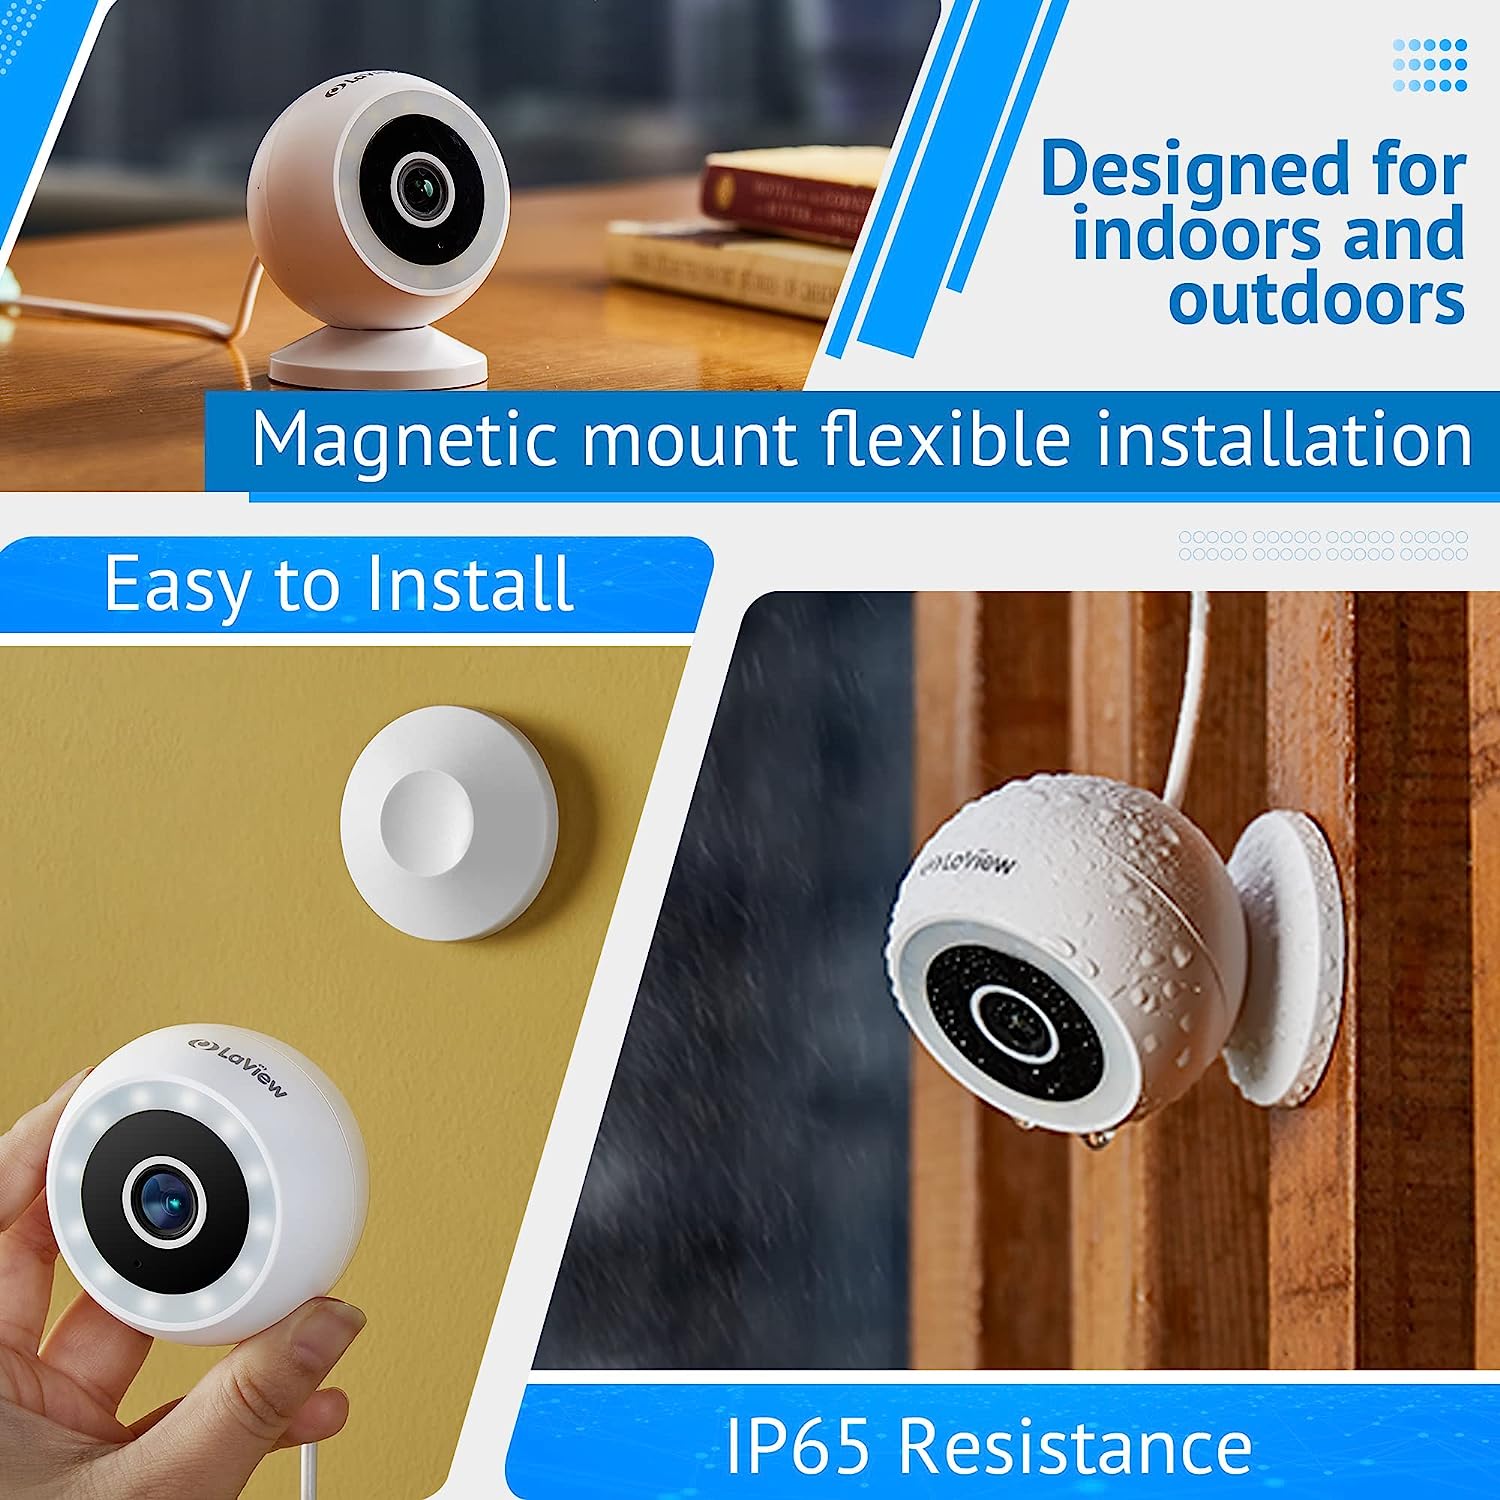 LaView 4MP Security Cameras Outdoor Indoor 4pc Review